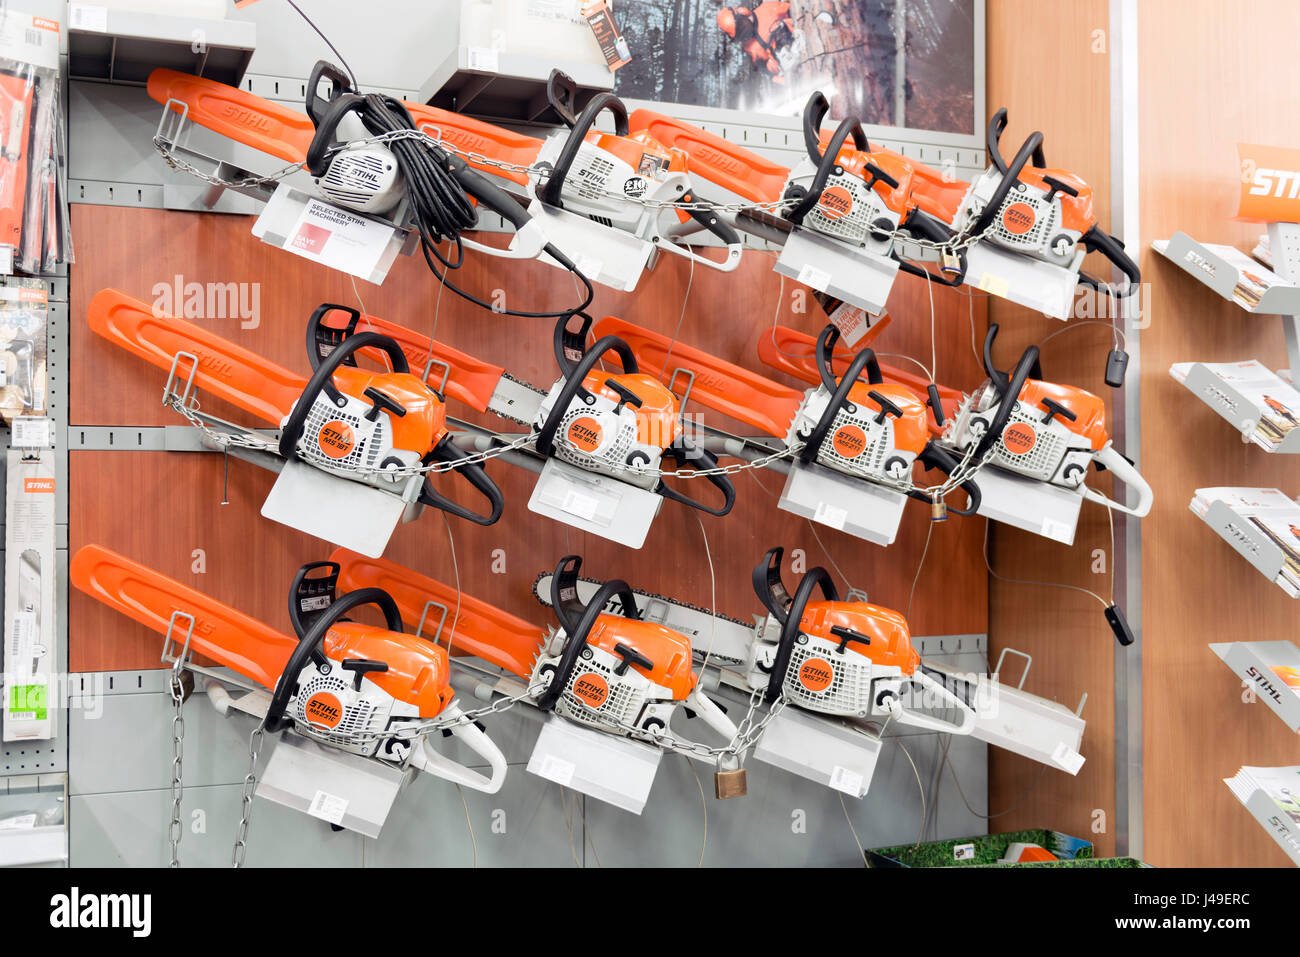 Stihl chainsaws for sale in a store, UK. Stock Photo